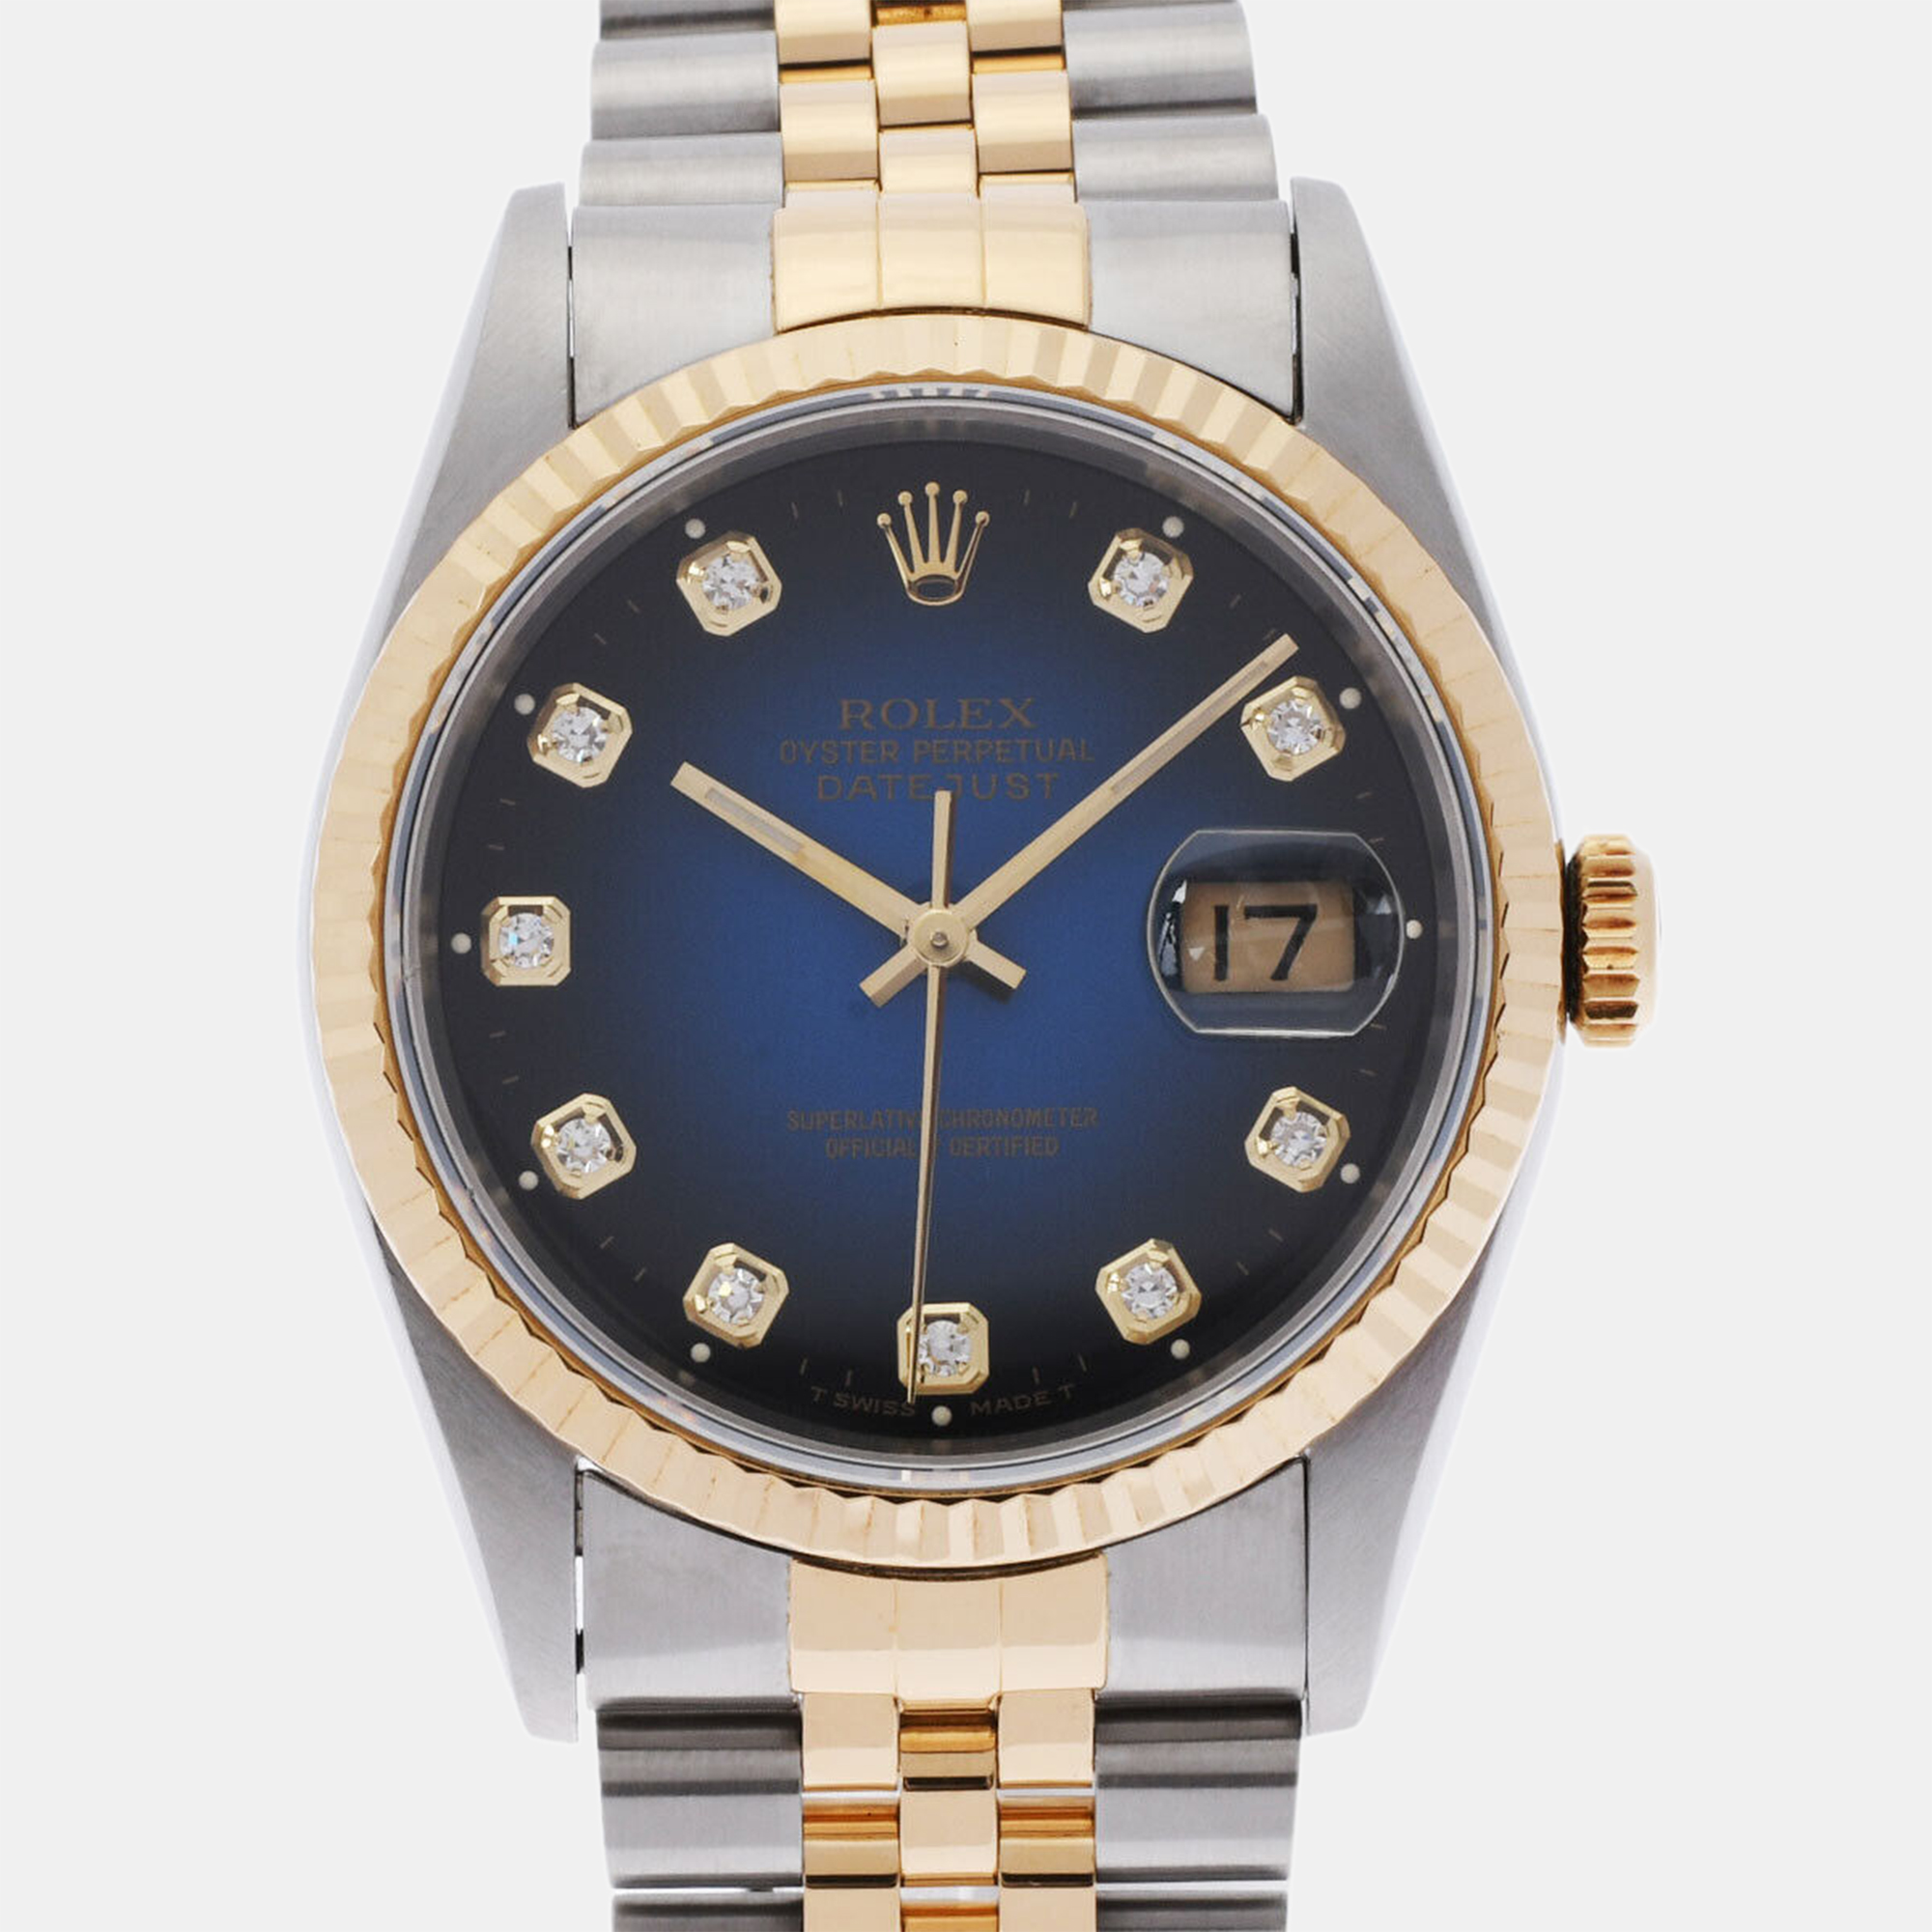 

Rolex Champagne Diamond 18k Yellow Gold Stainless Steel Datejust 16233 Automatic Men's Wristwatch 36 mm, Blue